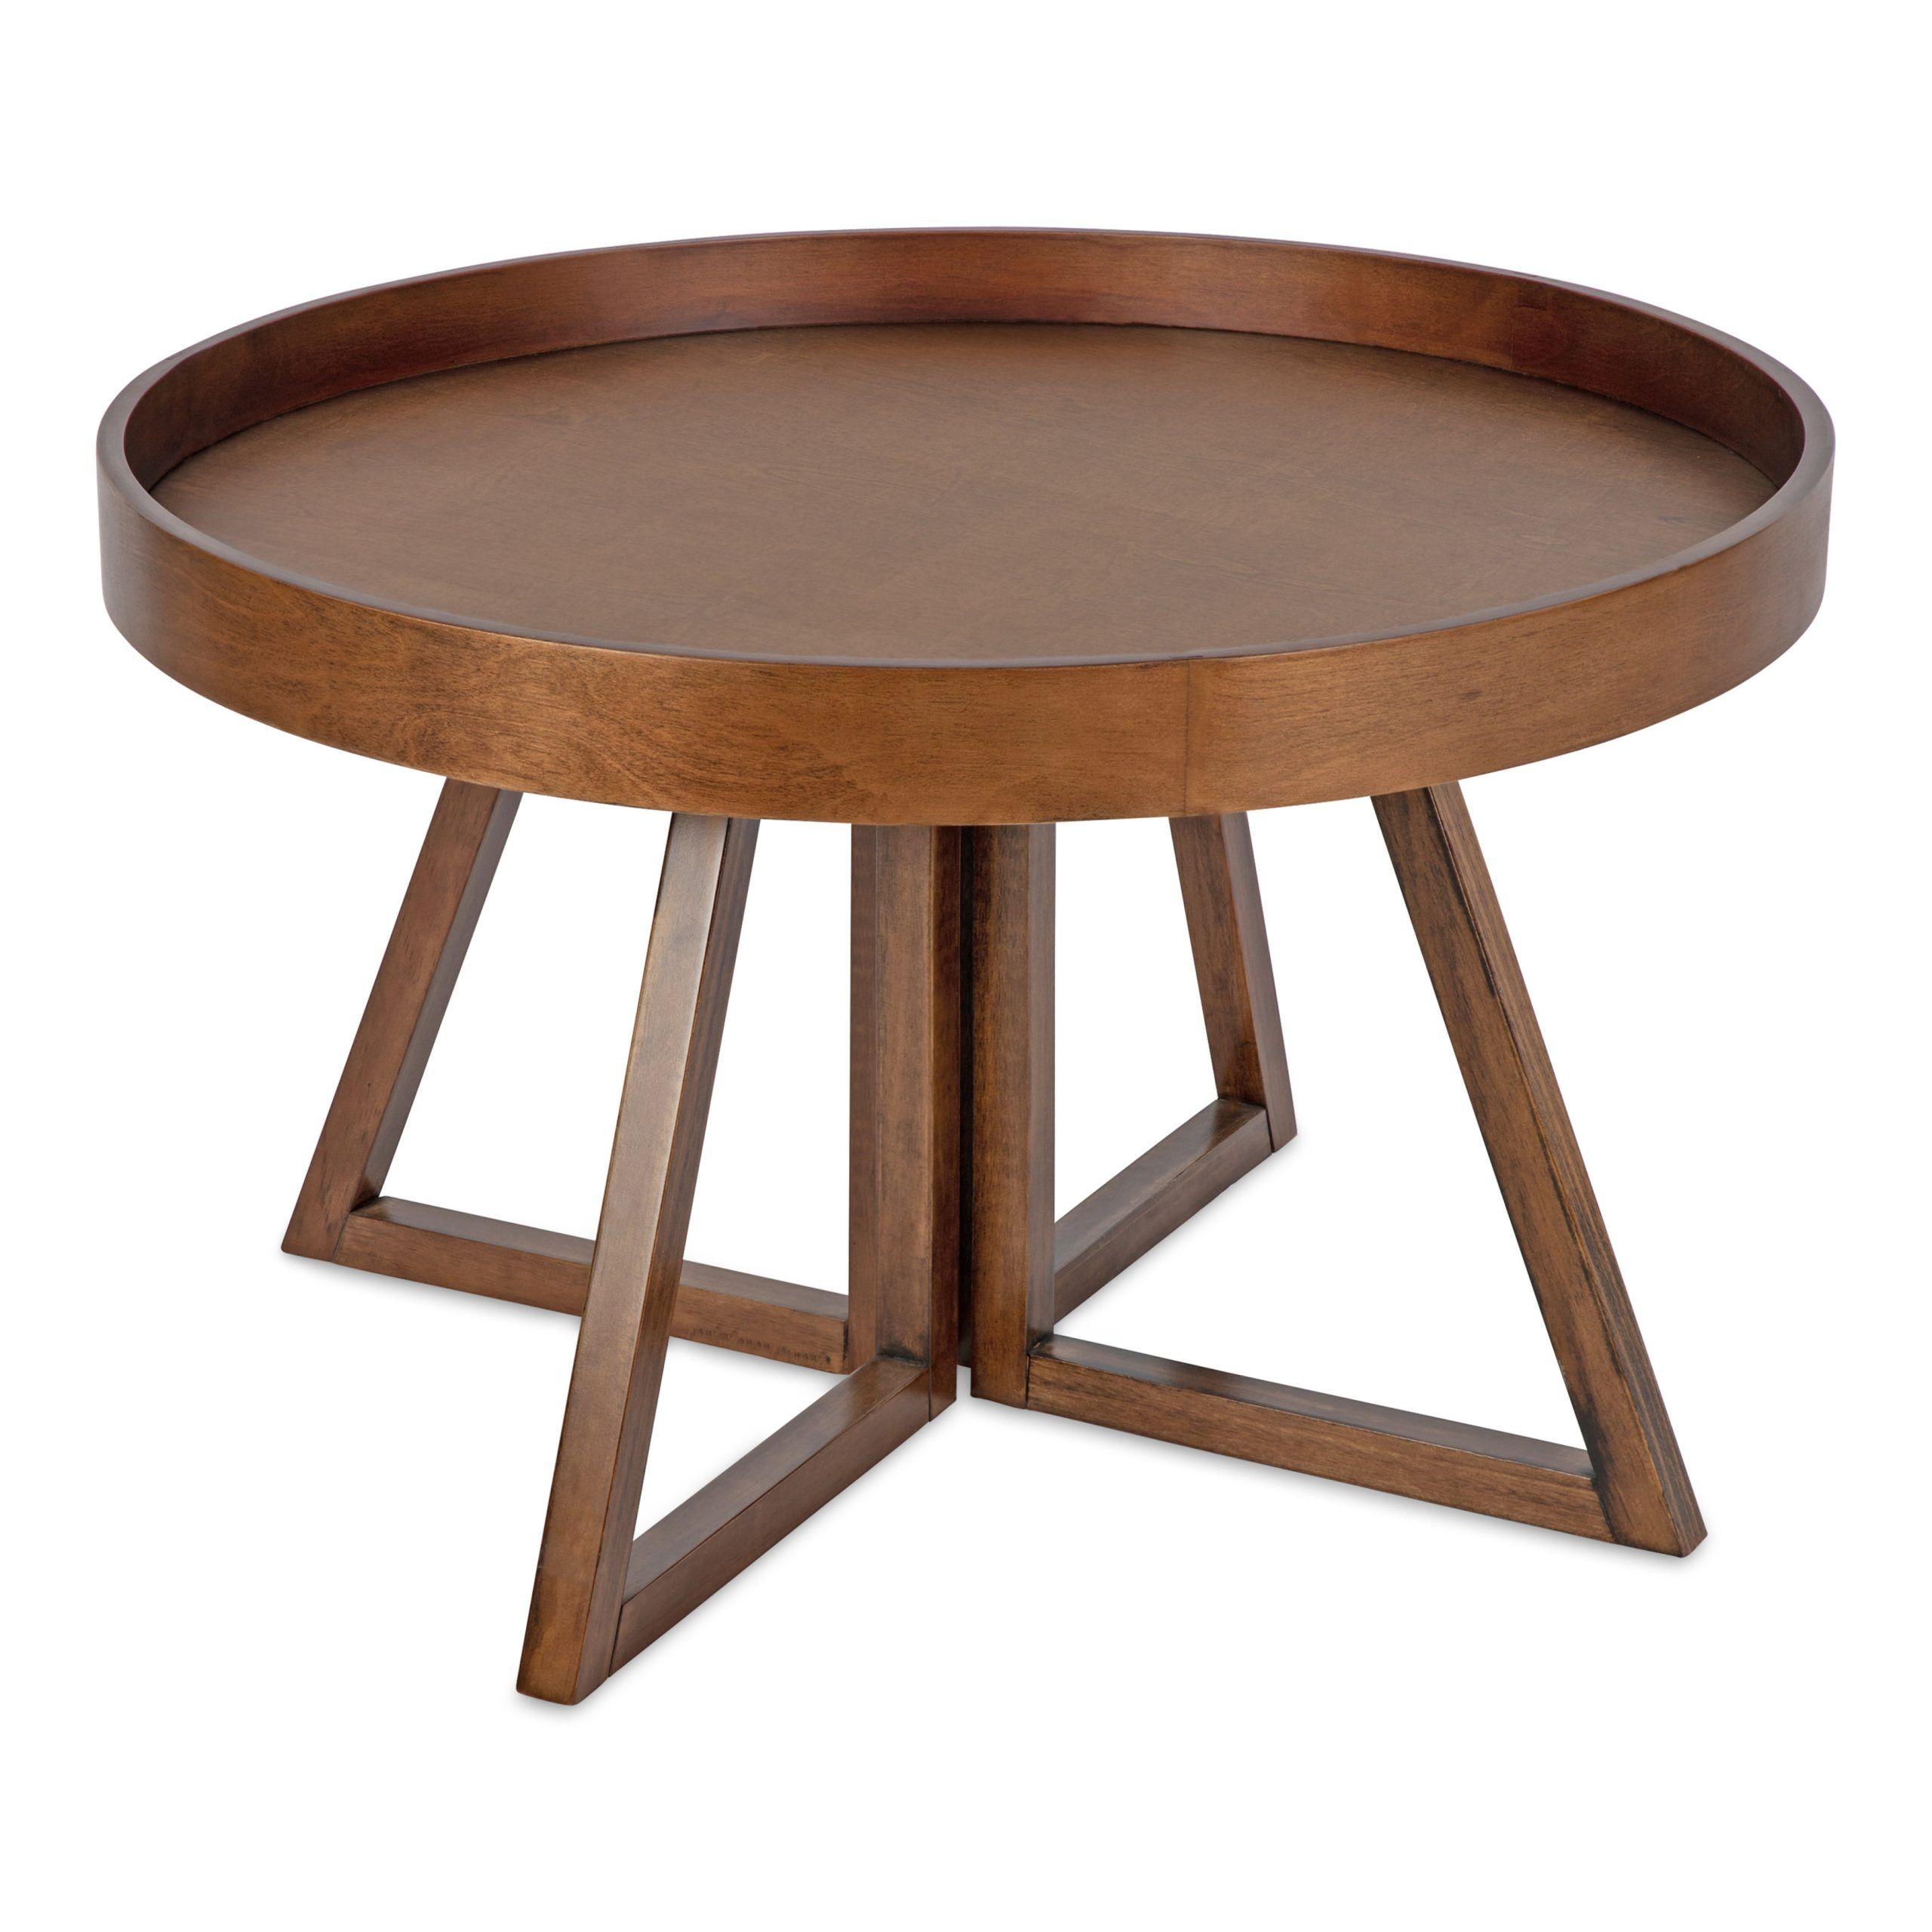 Kate And Laurel Avery Modern Round Coffee Table, 30" X 30" X 18 Throughout Monaco Round Coffee Tables (View 12 of 20)